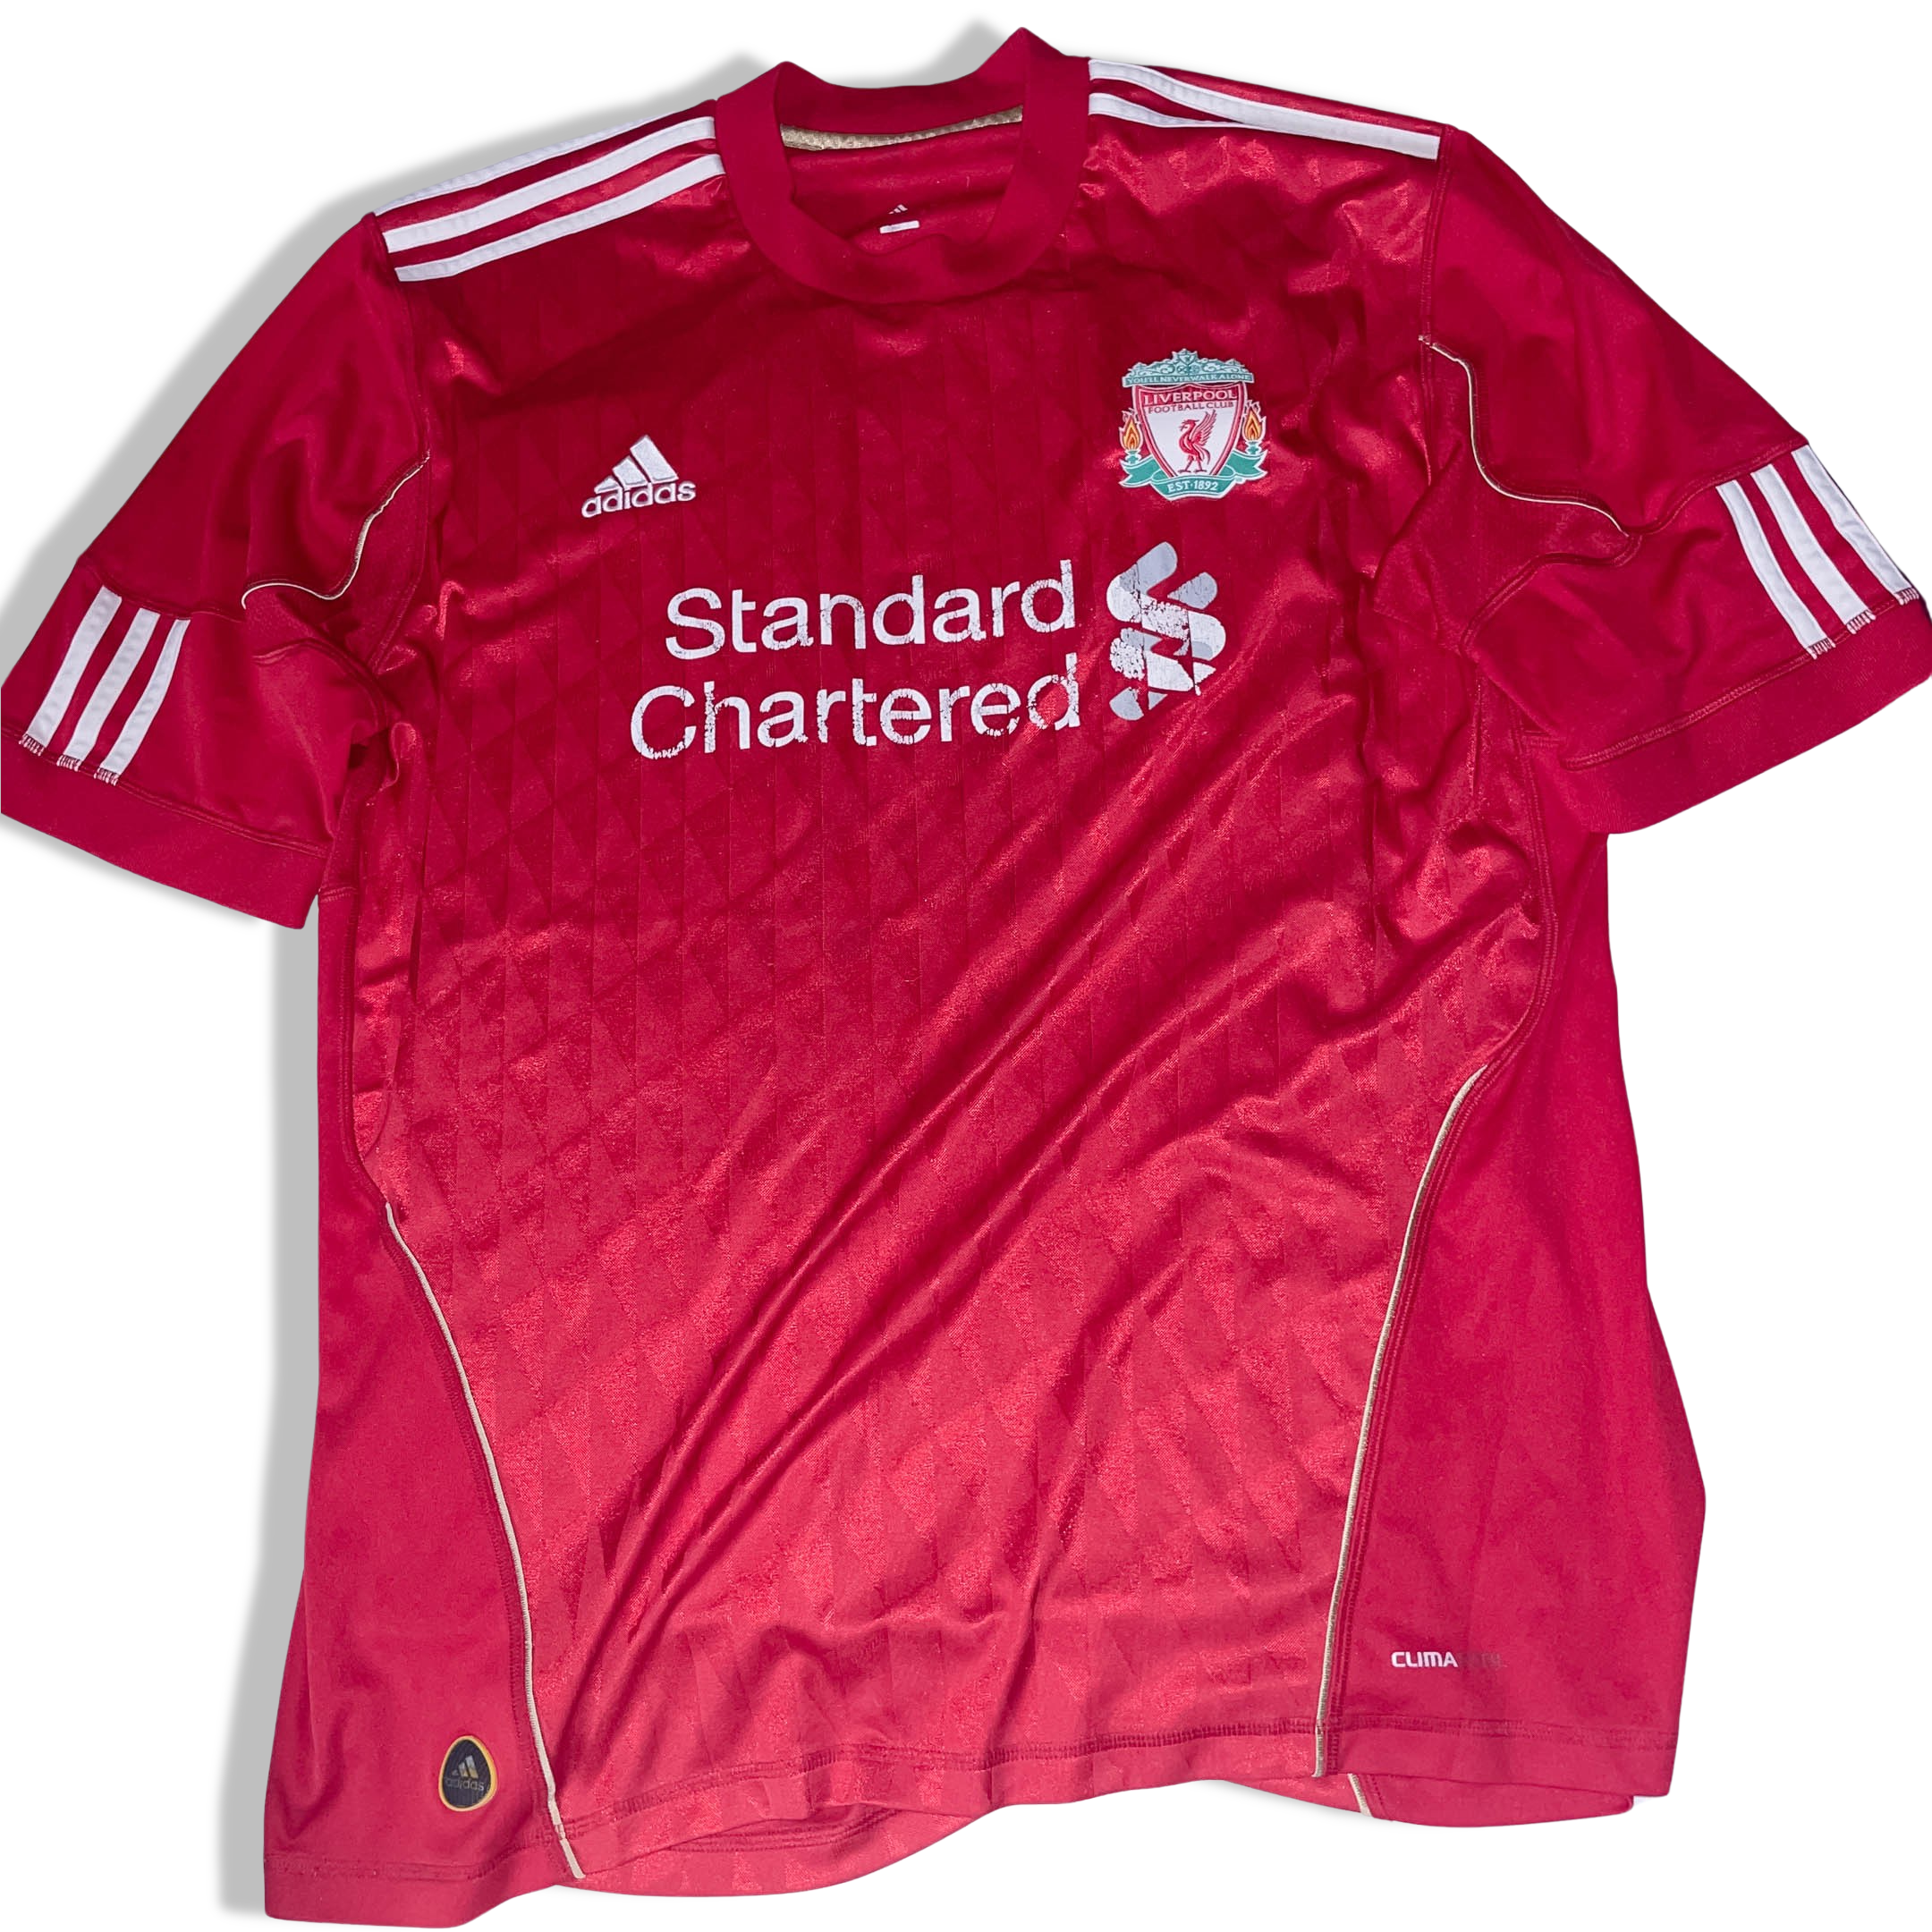 VINTAGE LIVERPOOL 2010 2011 HOME FOOTBALL SHIRT SOCCER RED JERSEY ADIDAS